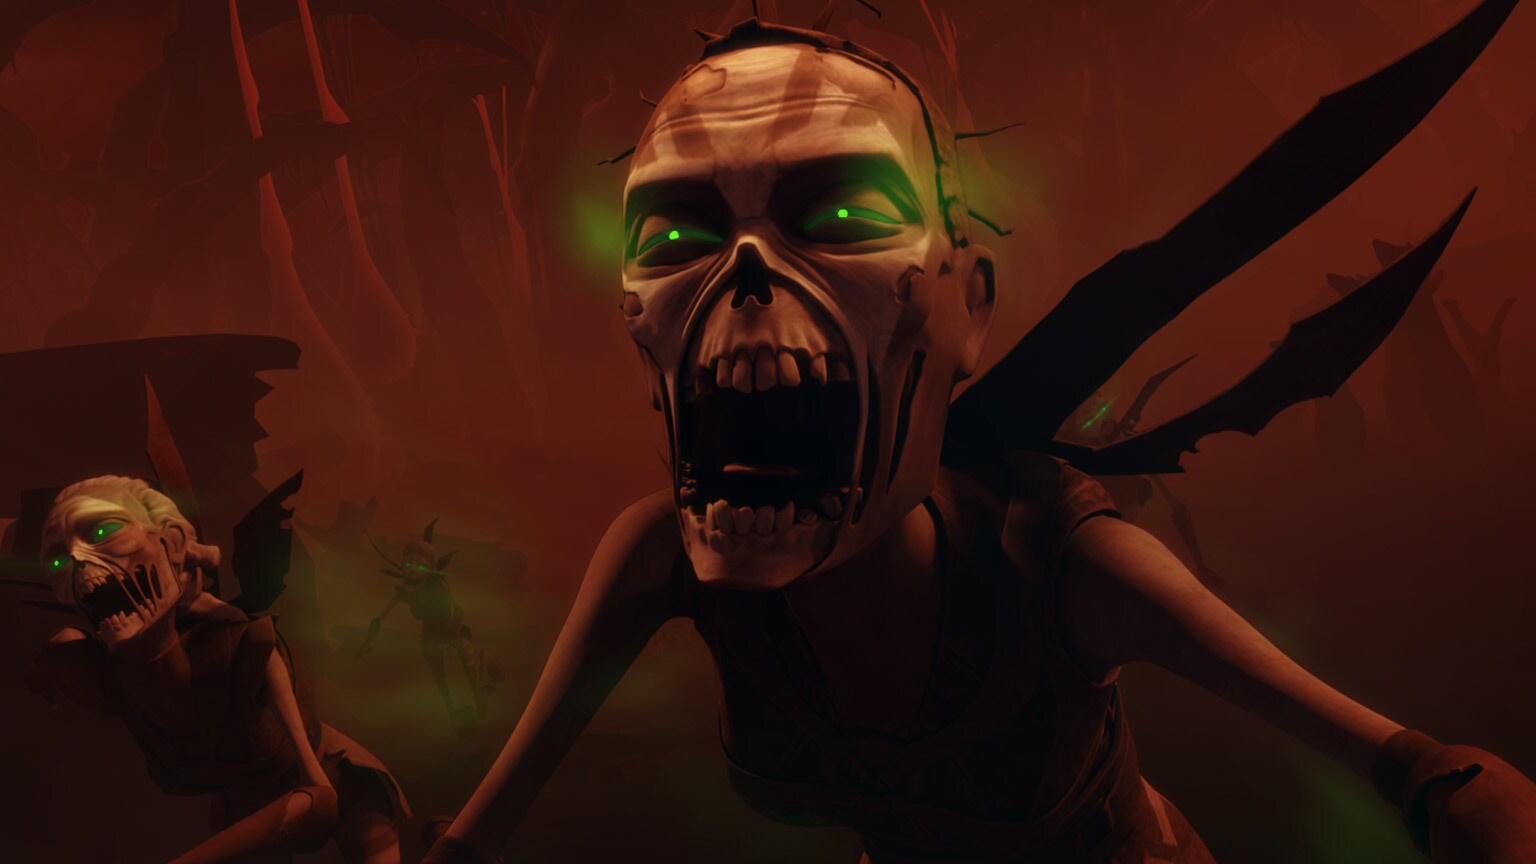 The Clone Wars Rewatch: "Massacre" of Witches